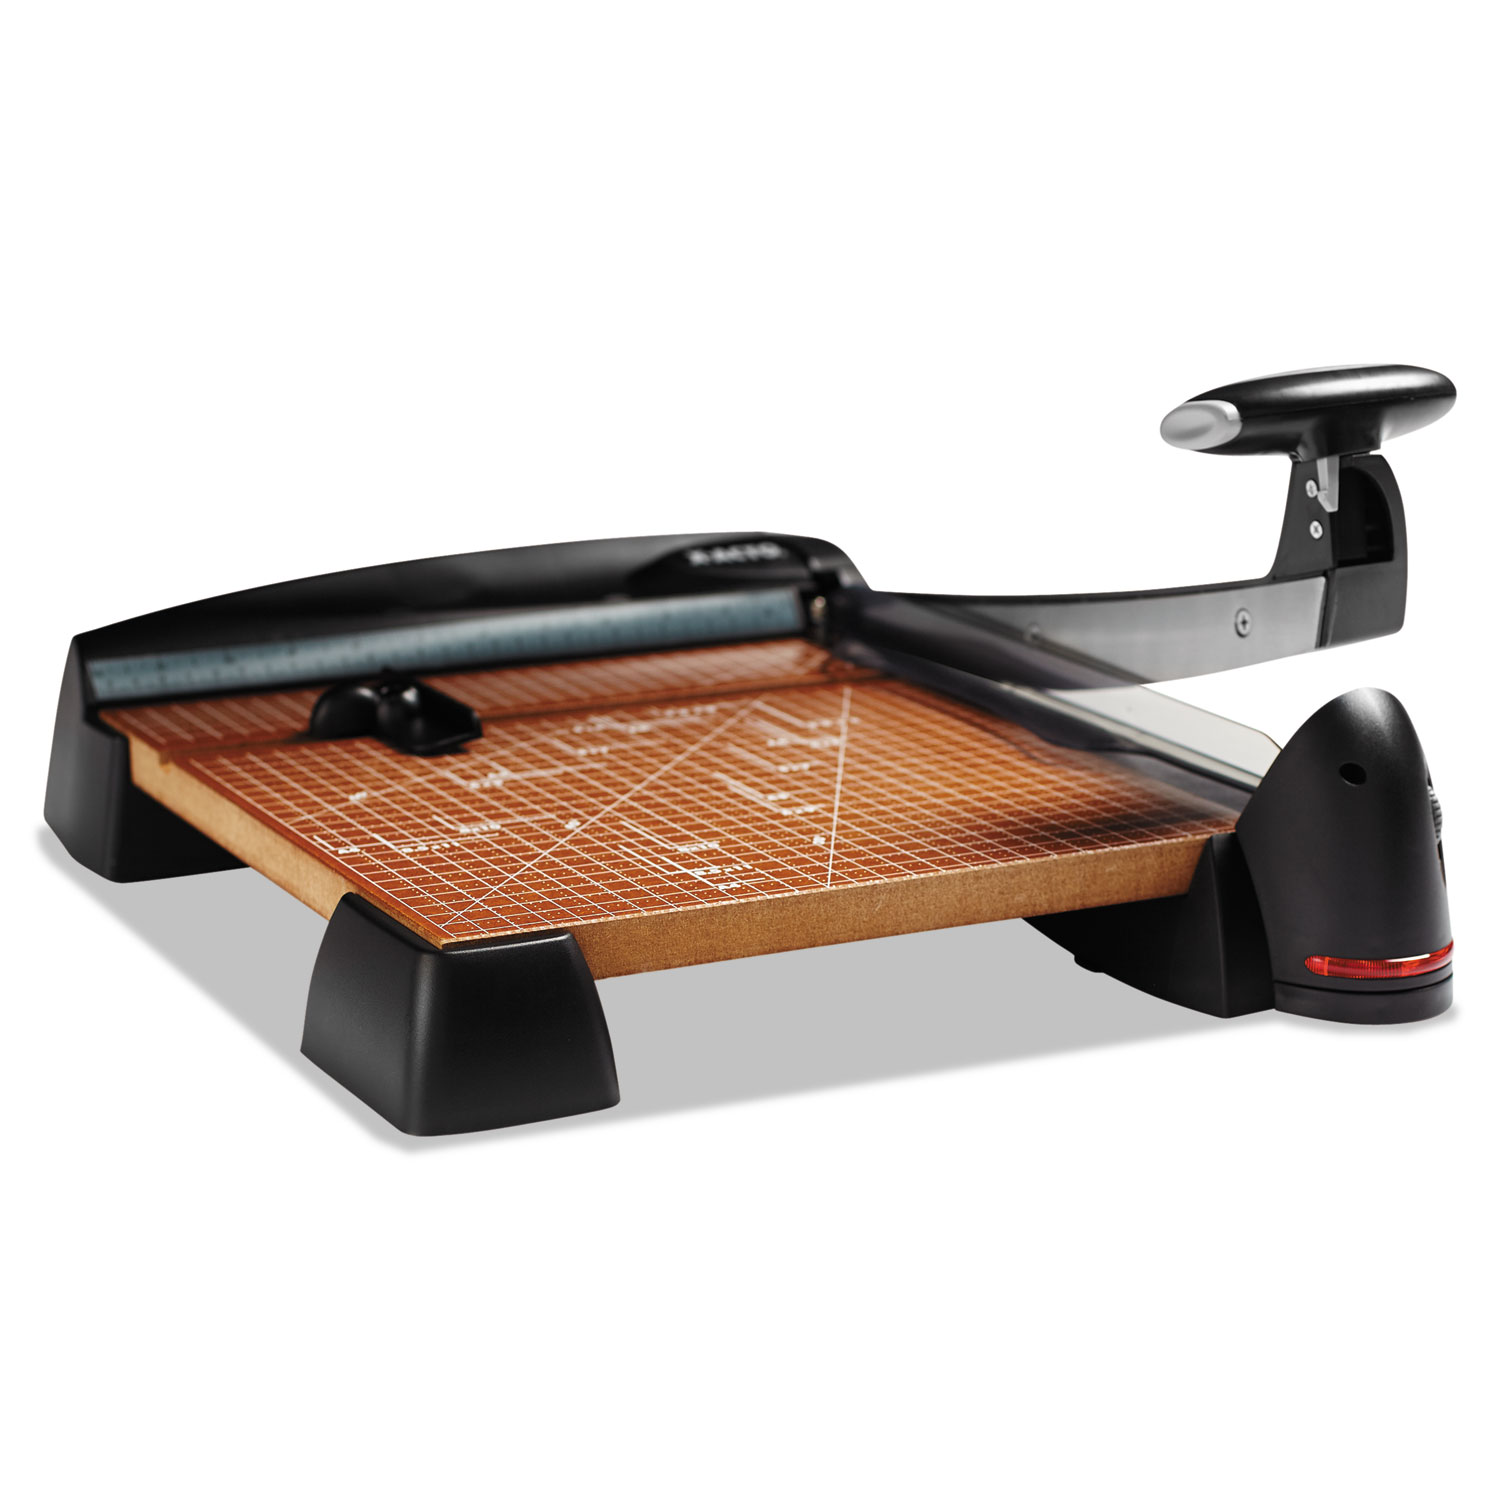 Elmer's X-ACTO 12" Blade Wood Base Laser Trimmer - Cuts 12Sheet - 12" Cutting Length - 15" Height x 18.3" Width - Wood Base, Ste